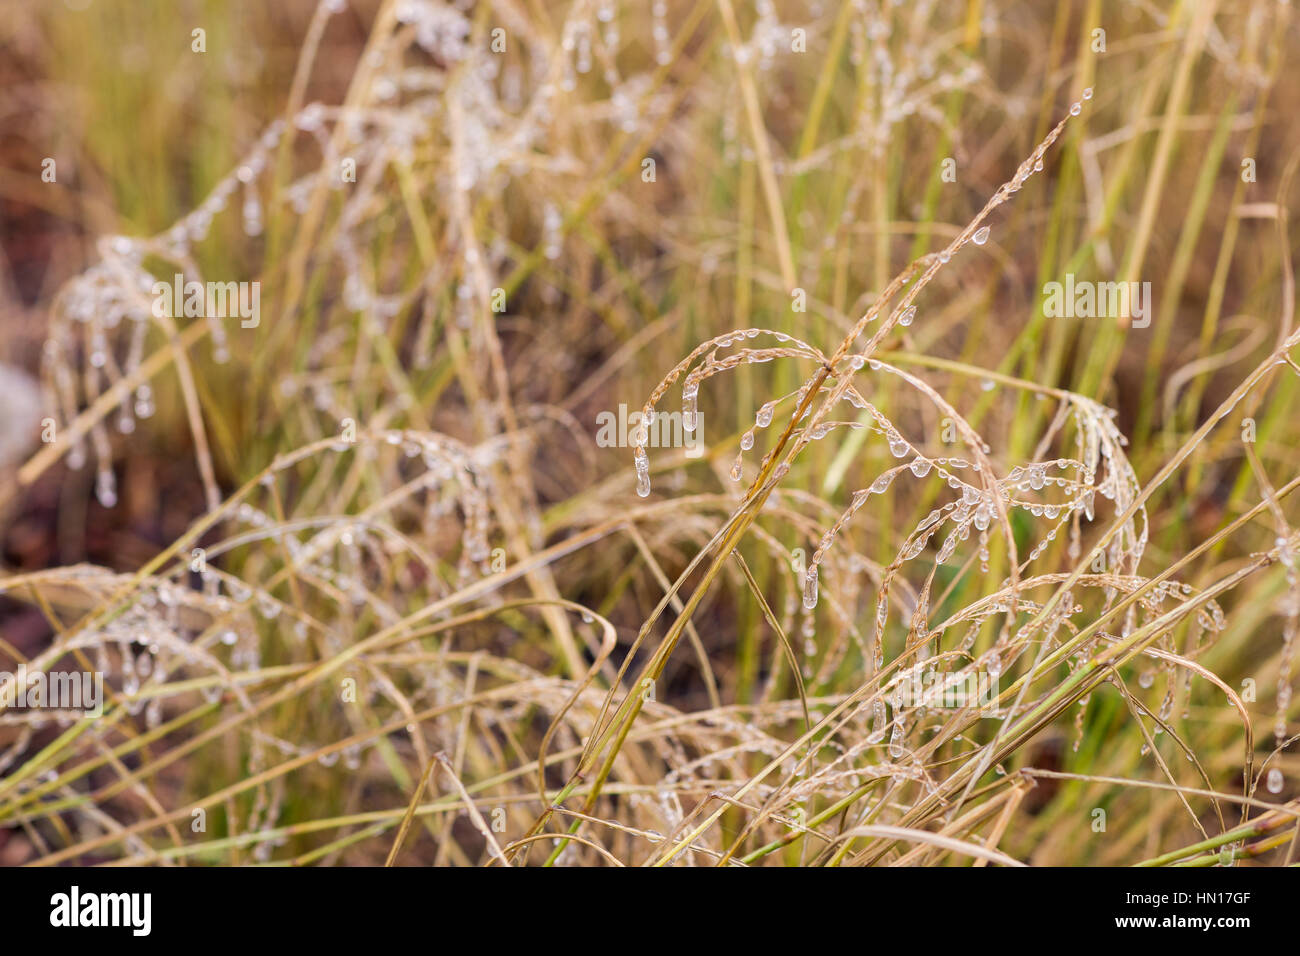 Frozen drops of rain water on yellow blades of dry grass in the park. The end of golden autumn, the beginning of winter season. Stock Photo